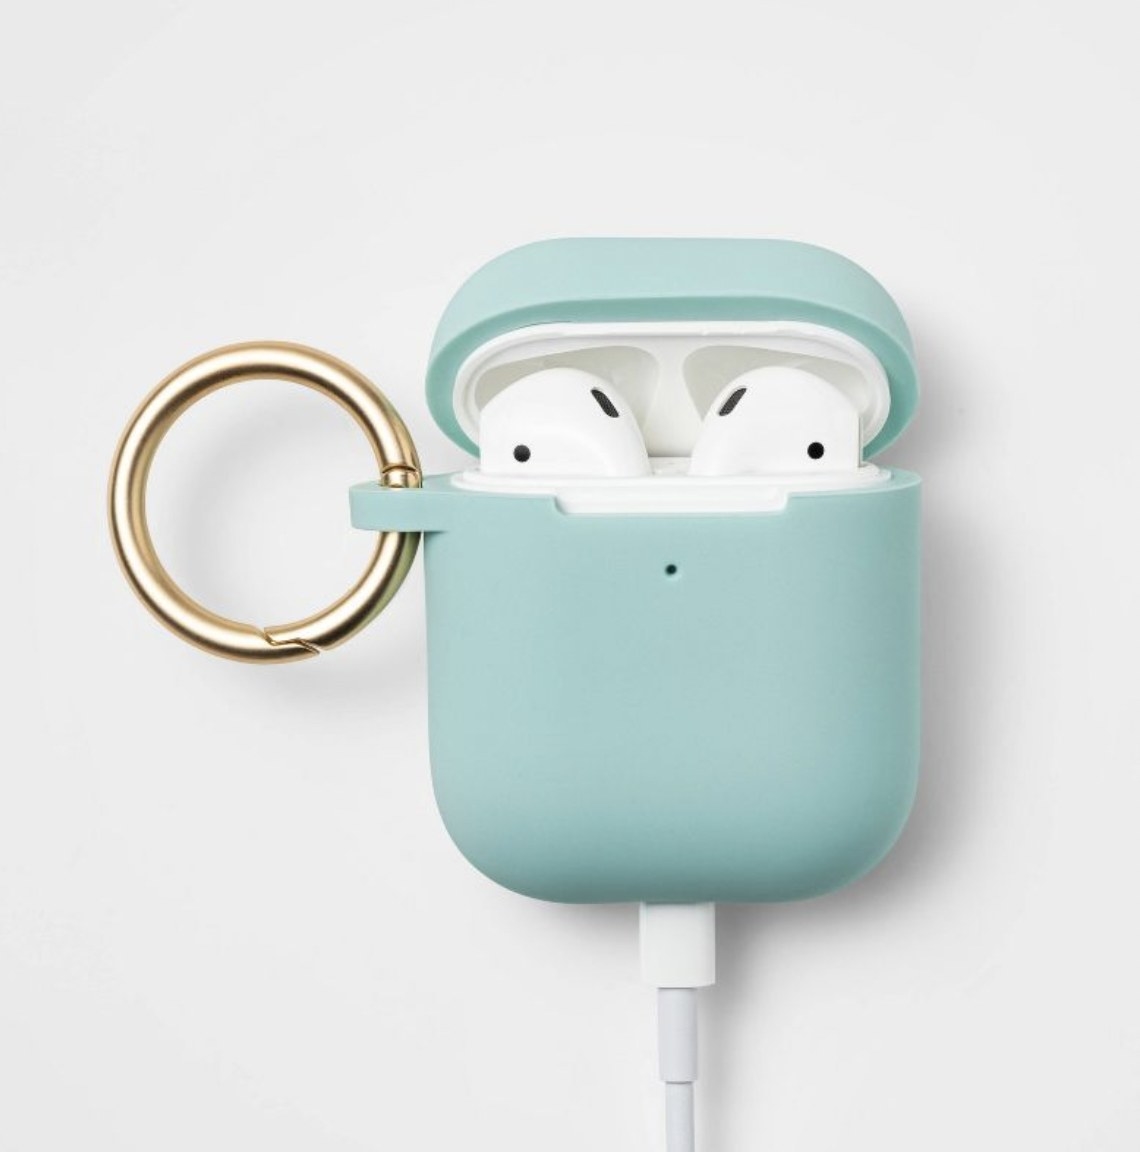 The teal silicone airpods case with gold hook